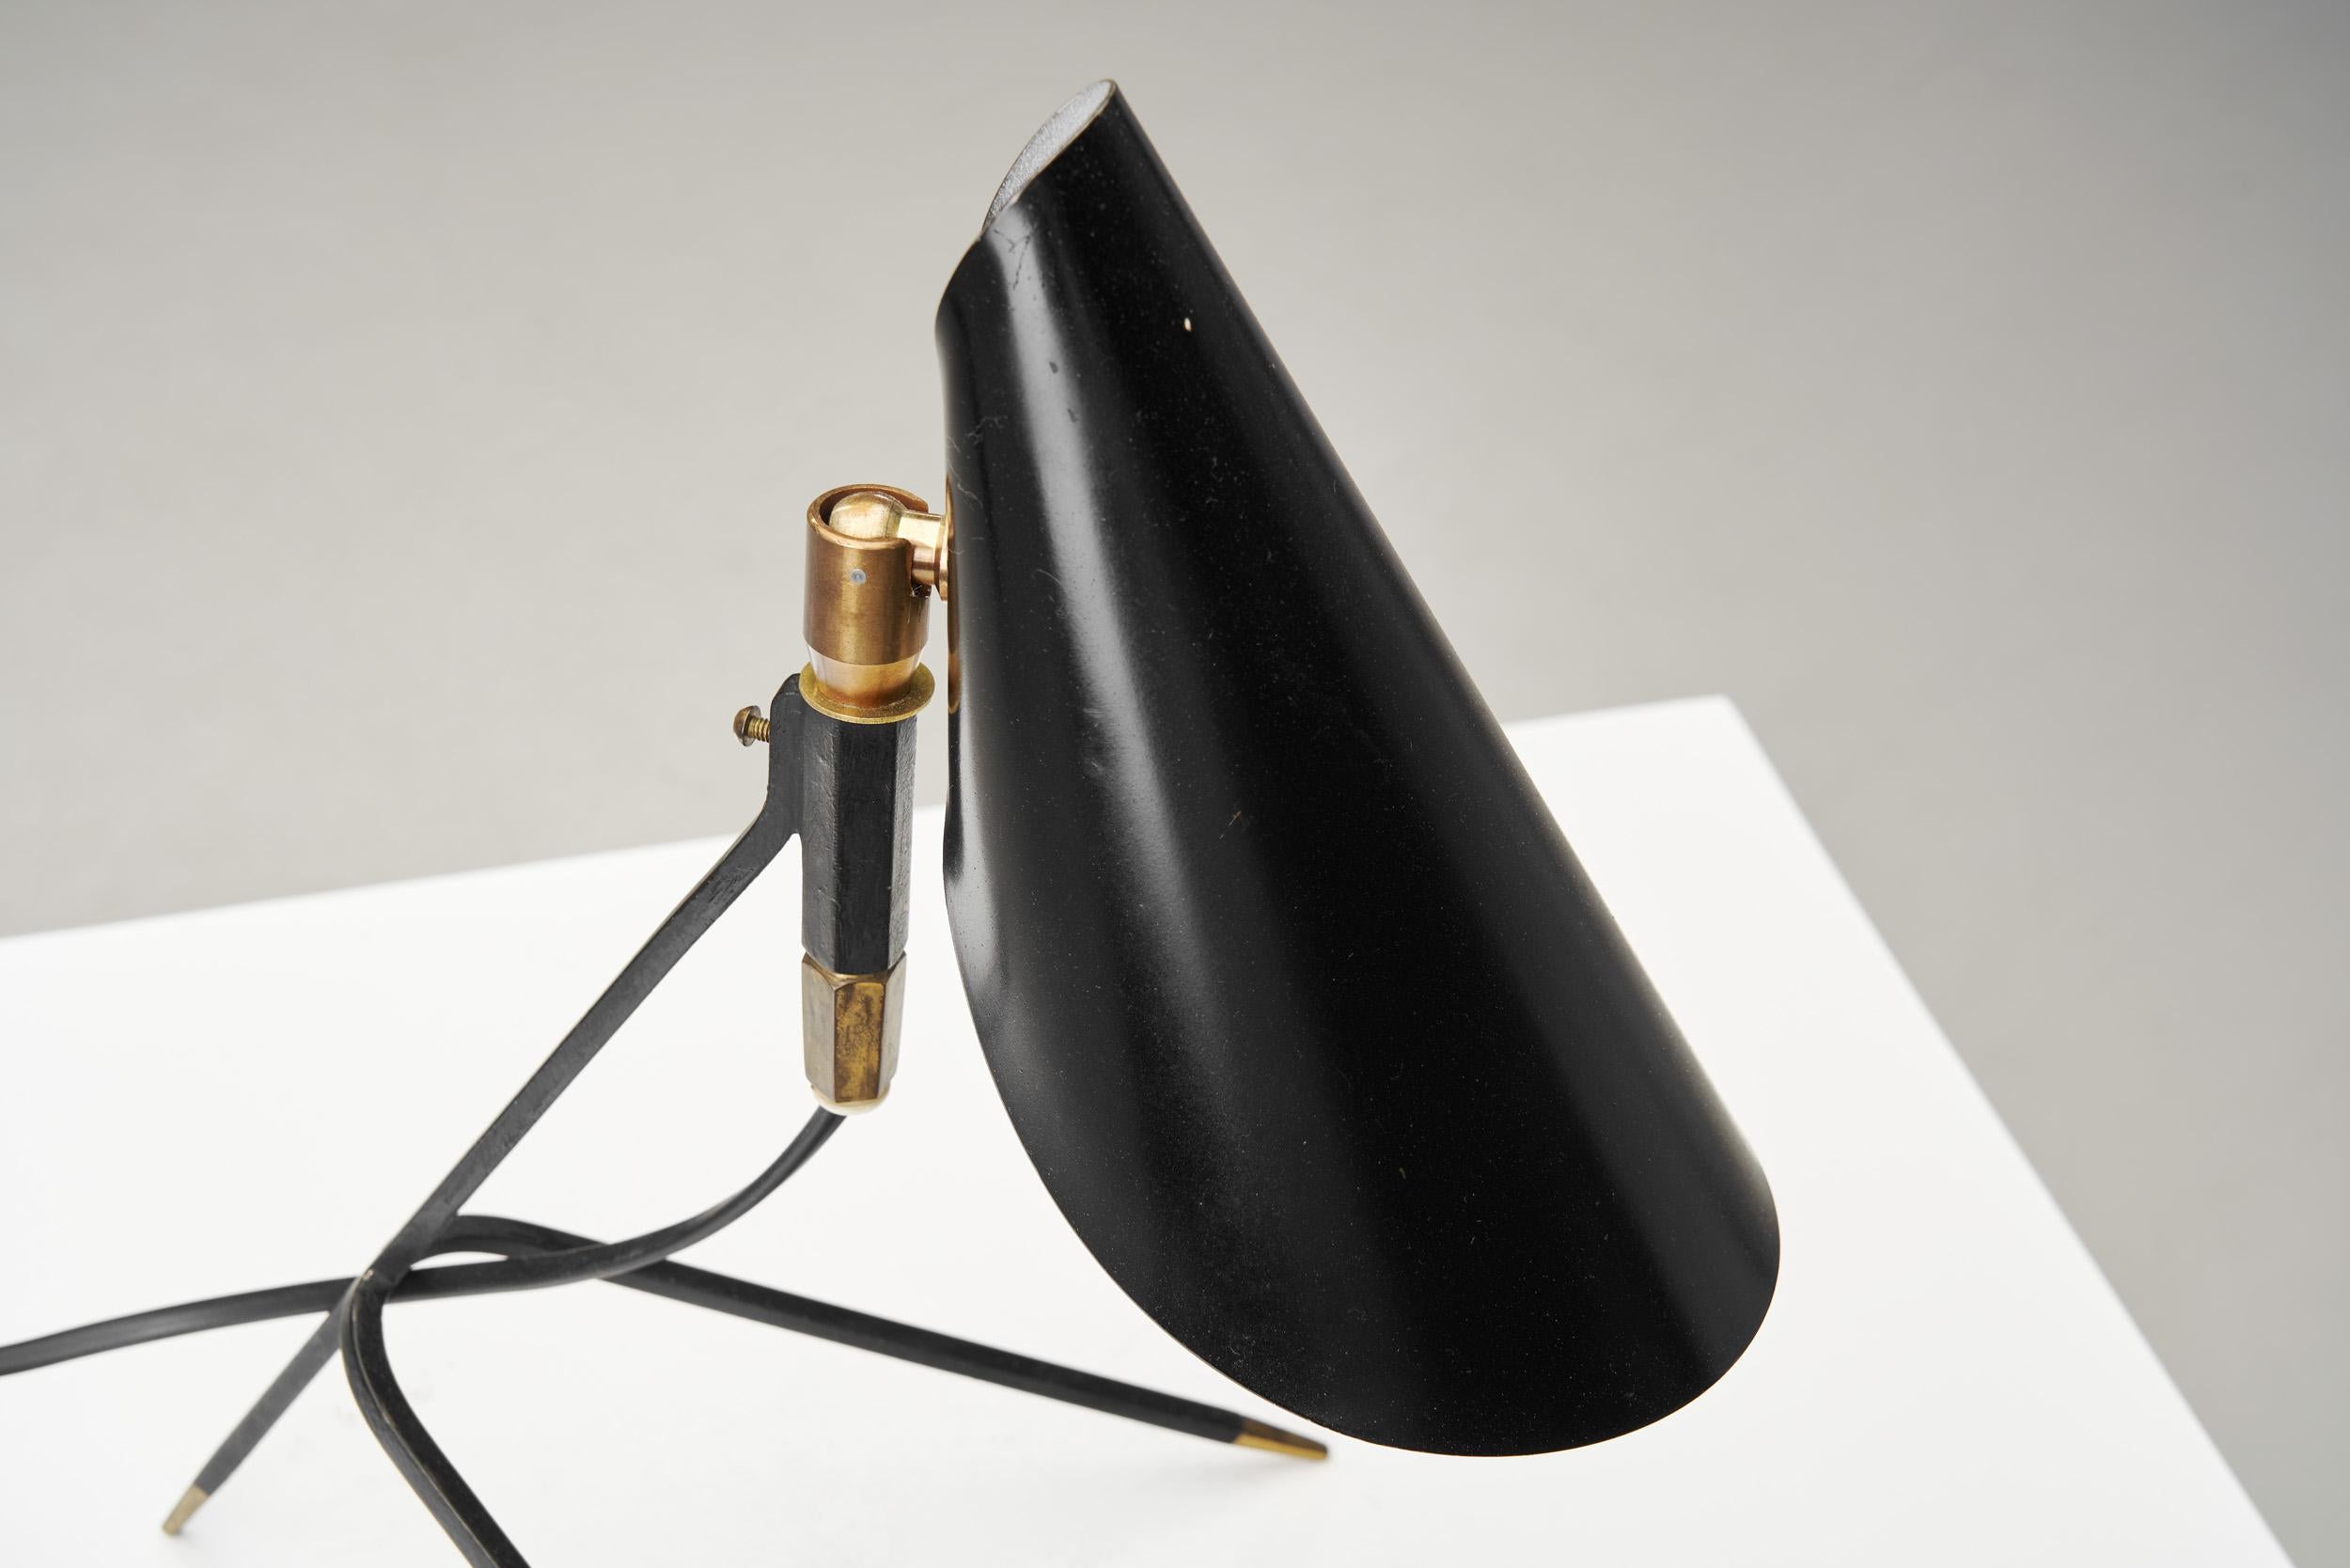 Lacquered Mid-Century Modern Table Lamp with Brass Details, Scandinavia ca 1960s For Sale 5